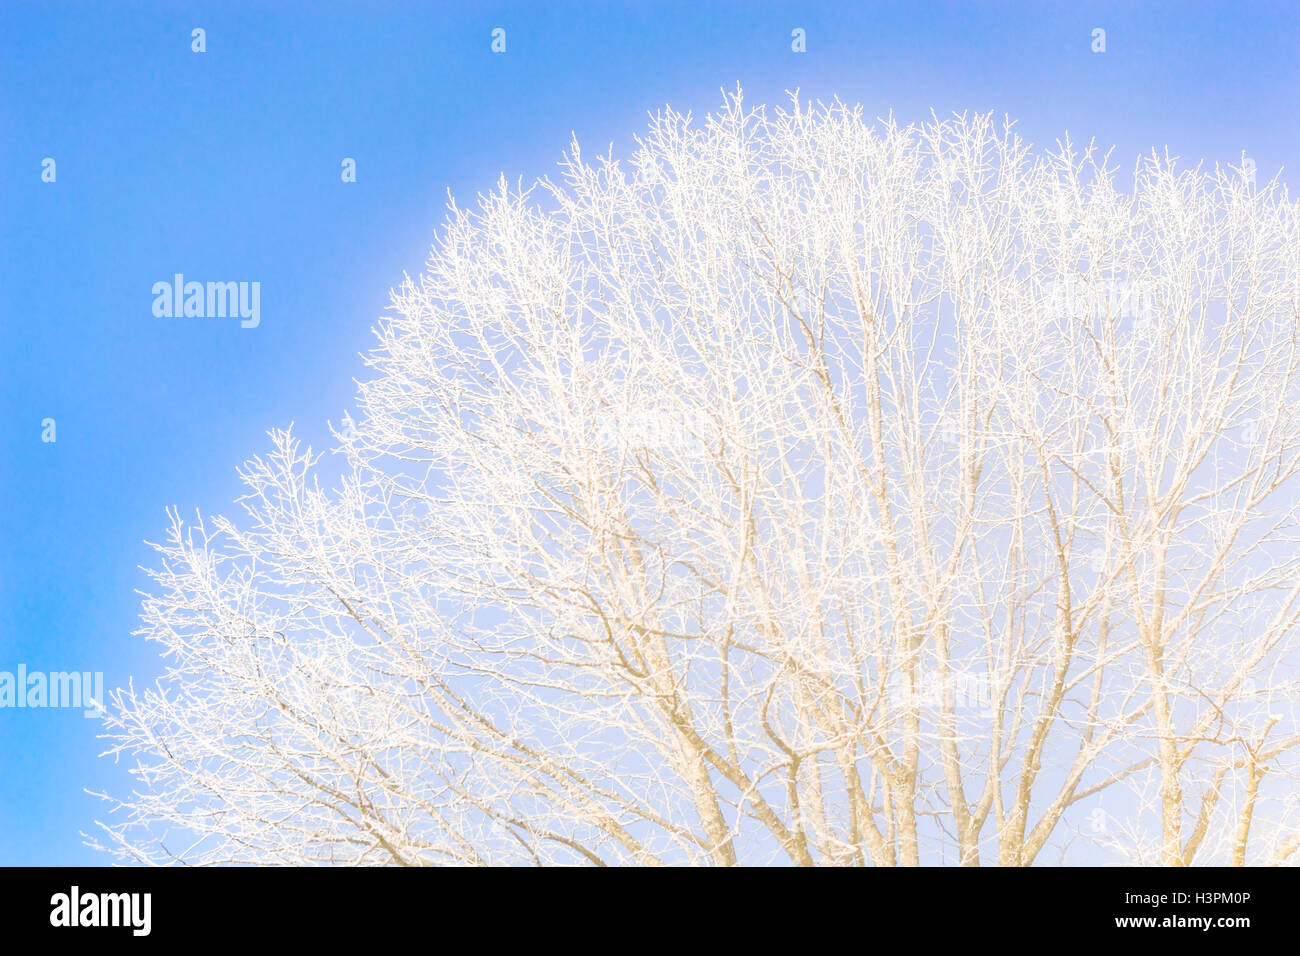 A bare winter tree with a bright blue sky and white clouds behind it on a  sunny winter day Stock Photo - Alamy